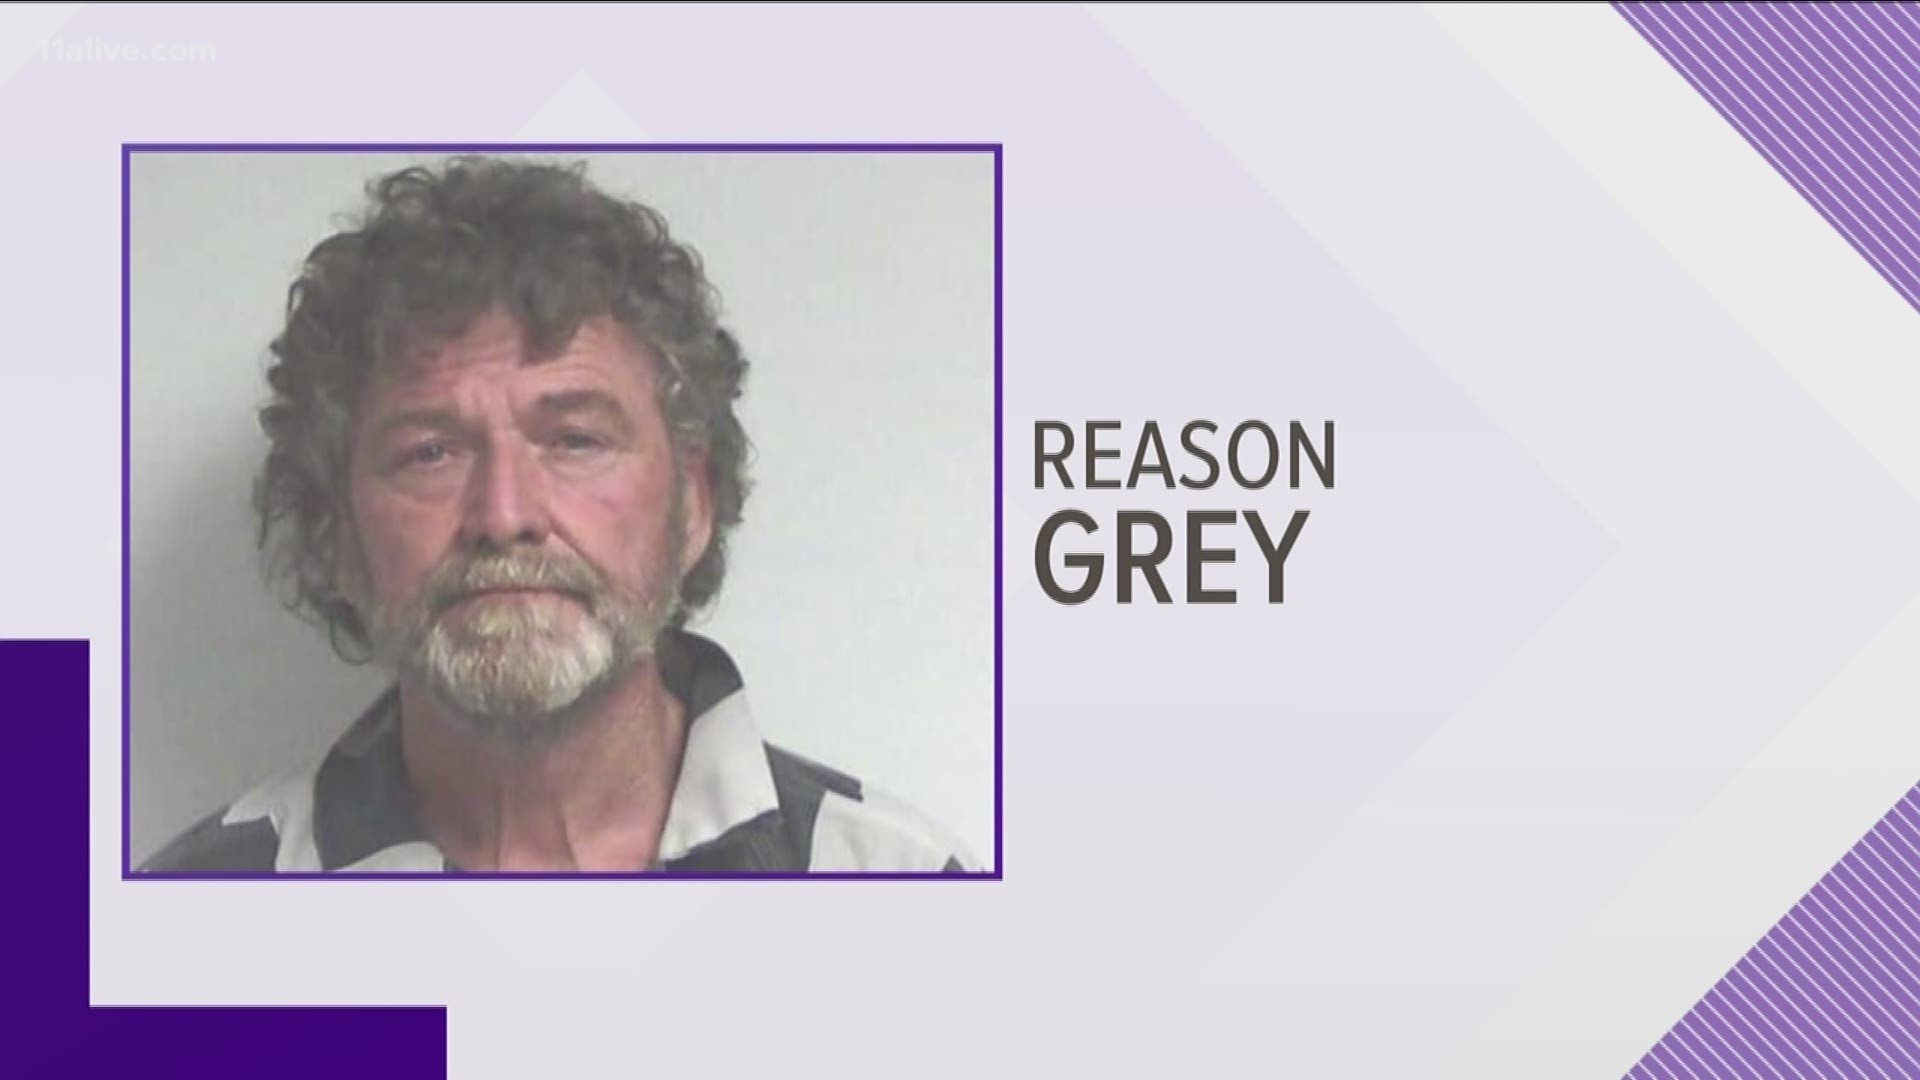 Grey was arrested for obstruction after deputies said he tried to hide dogs in the closet of his home. At the time, all of the animals on his property were supposed to be gone - surrendered to the shelter or animal rescue groups. But deputies and animal control said they found 98 more animals that day.